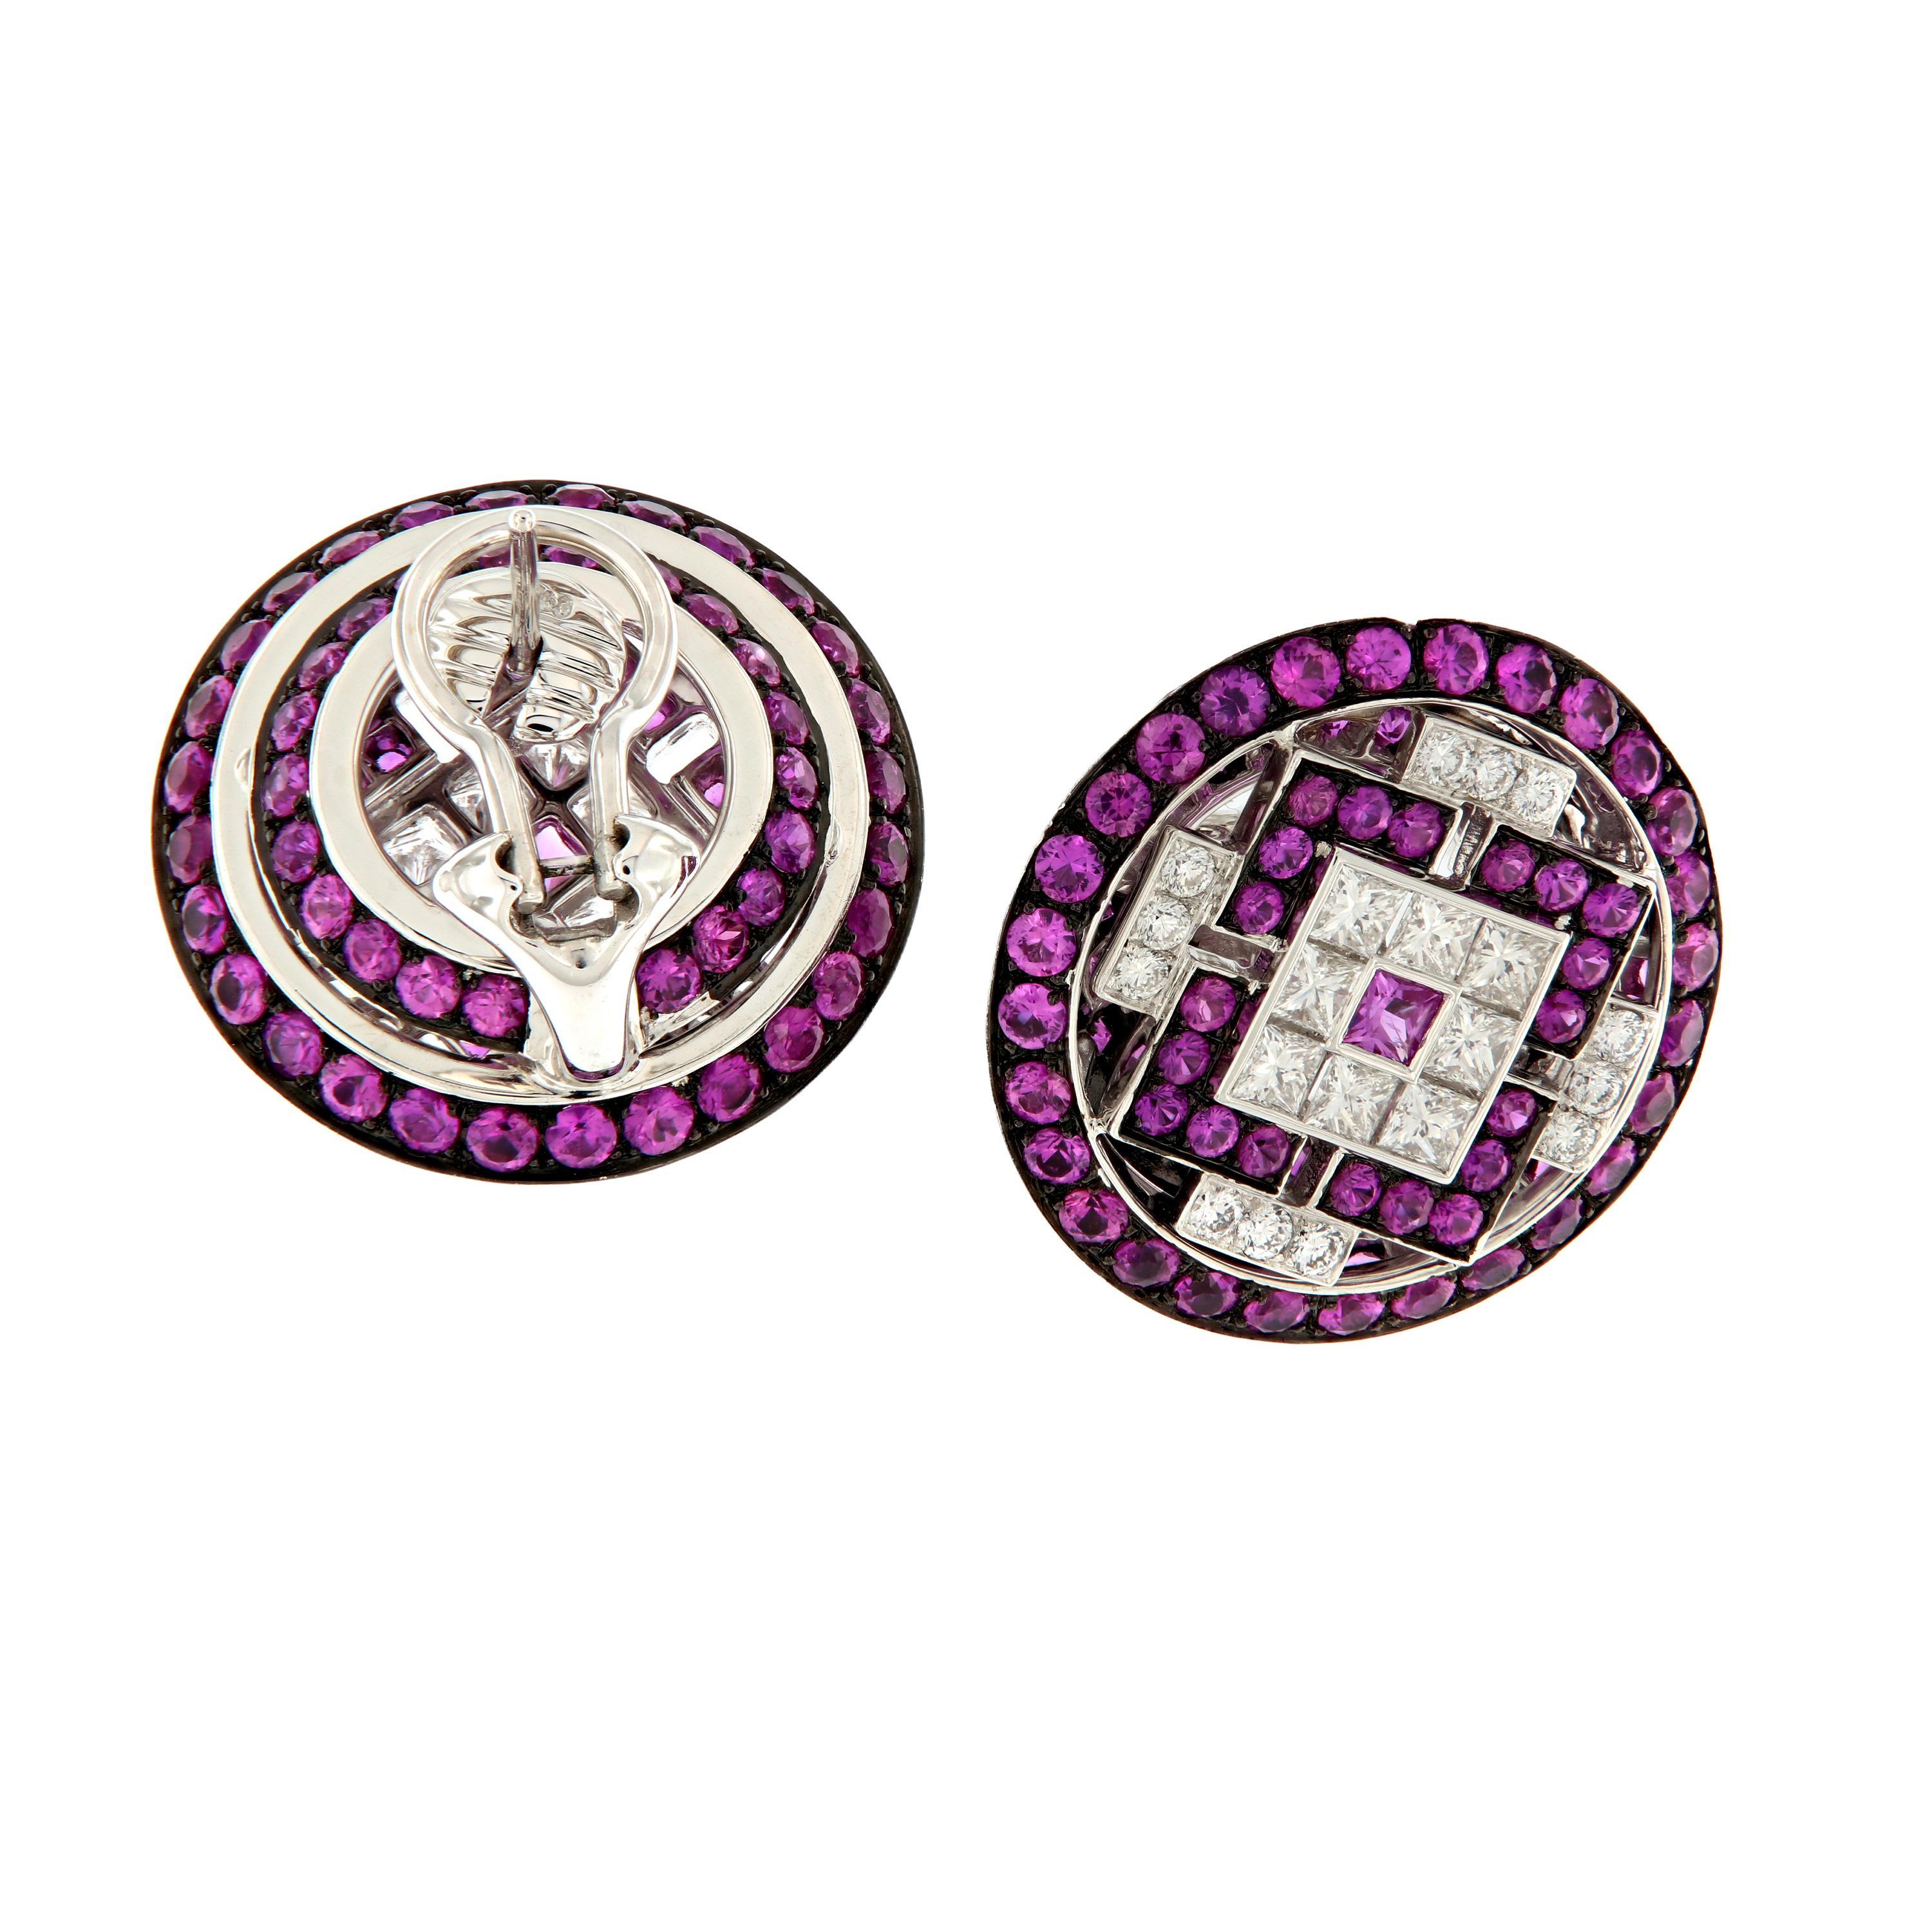 Stunning earrings of pink sapphires and diamonds set in a geometric design, finished with black rhodium plating over 18 karat white gold. Weigh 18.3 grams. 22mm in diameter.

Pink Sapphires 8.21 cttw
Diamonds 1.78 cttw